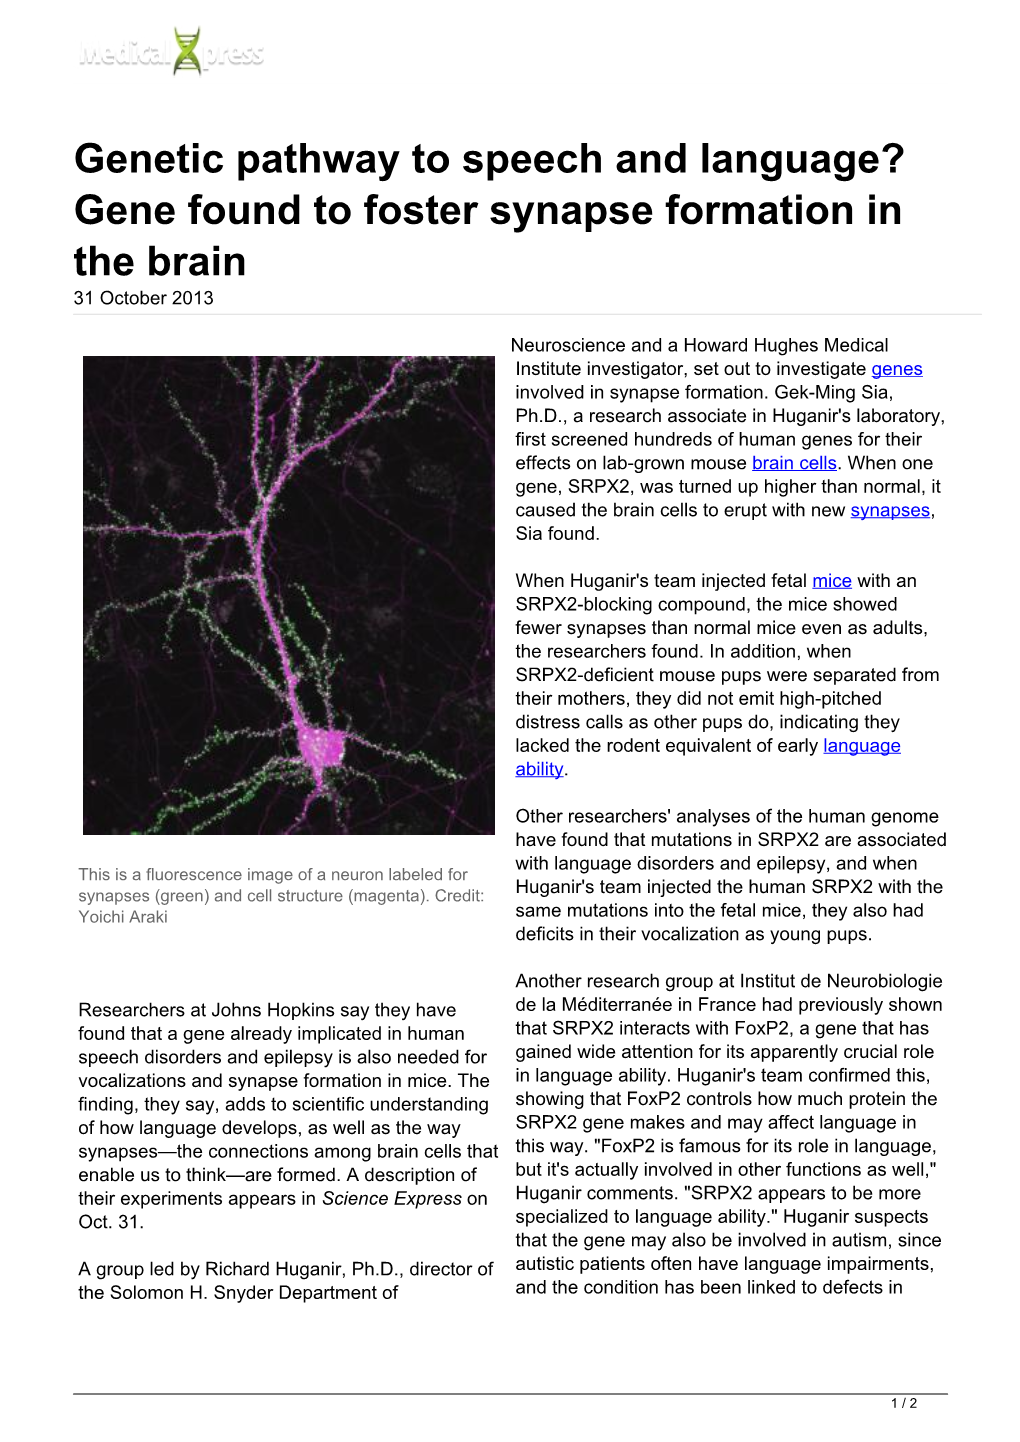 Genetic Pathway to Speech and Language? Gene Found to Foster Synapse Formation in the Brain 31 October 2013